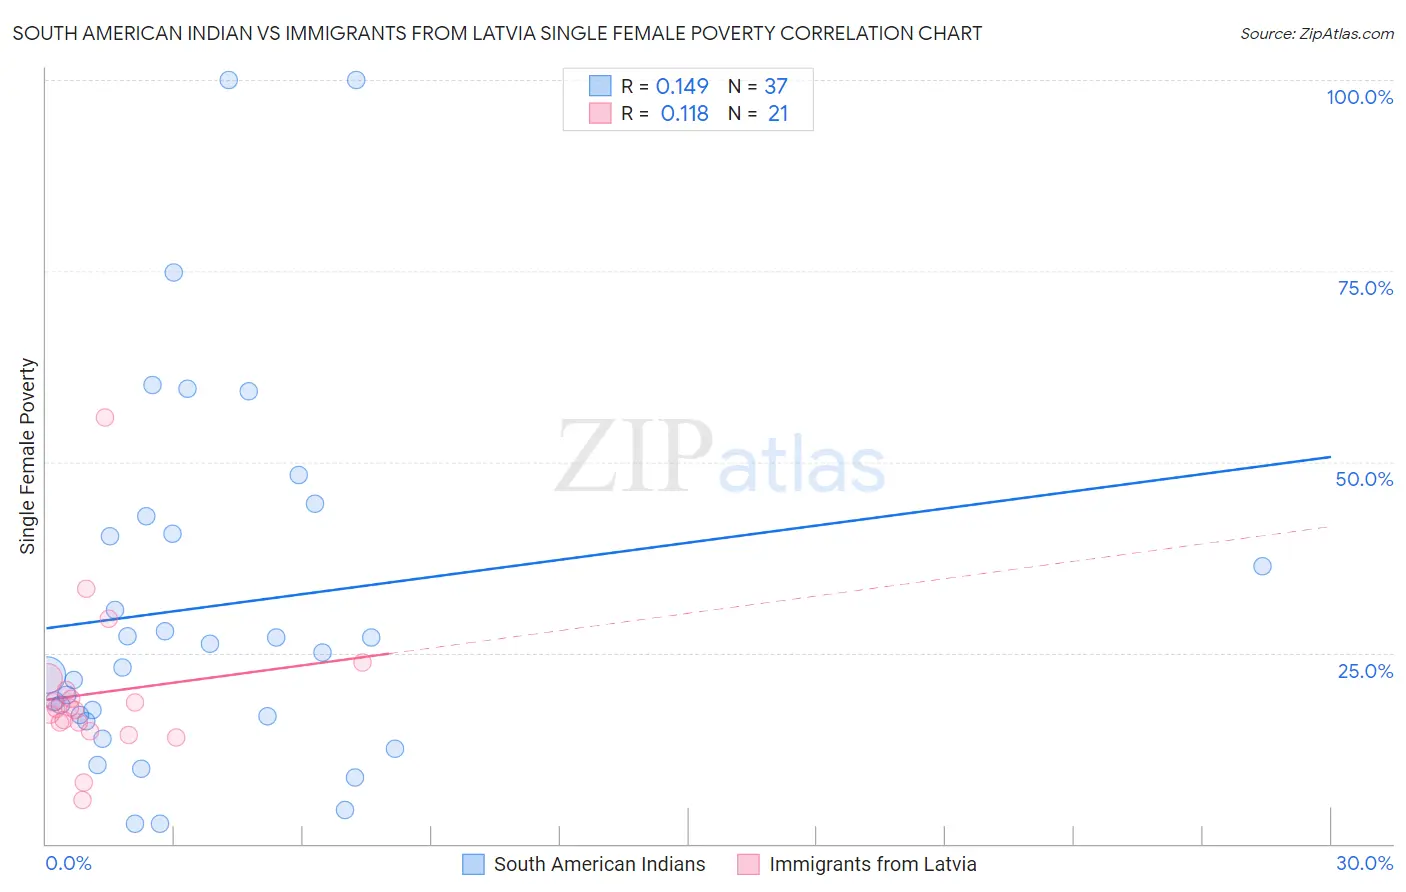 South American Indian vs Immigrants from Latvia Single Female Poverty